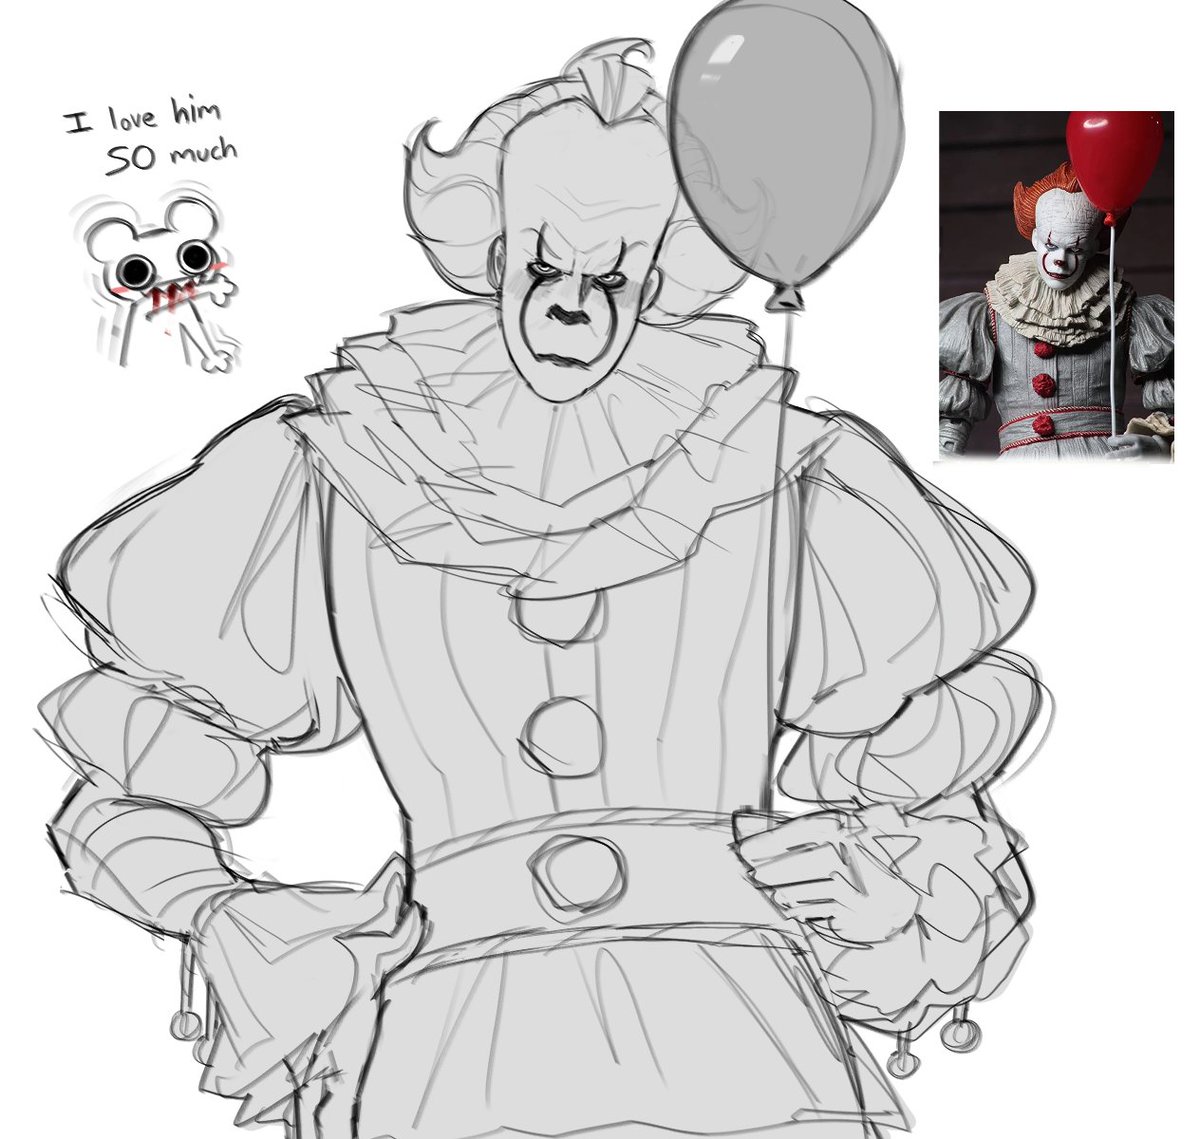 ma wife

#pennywise #IT